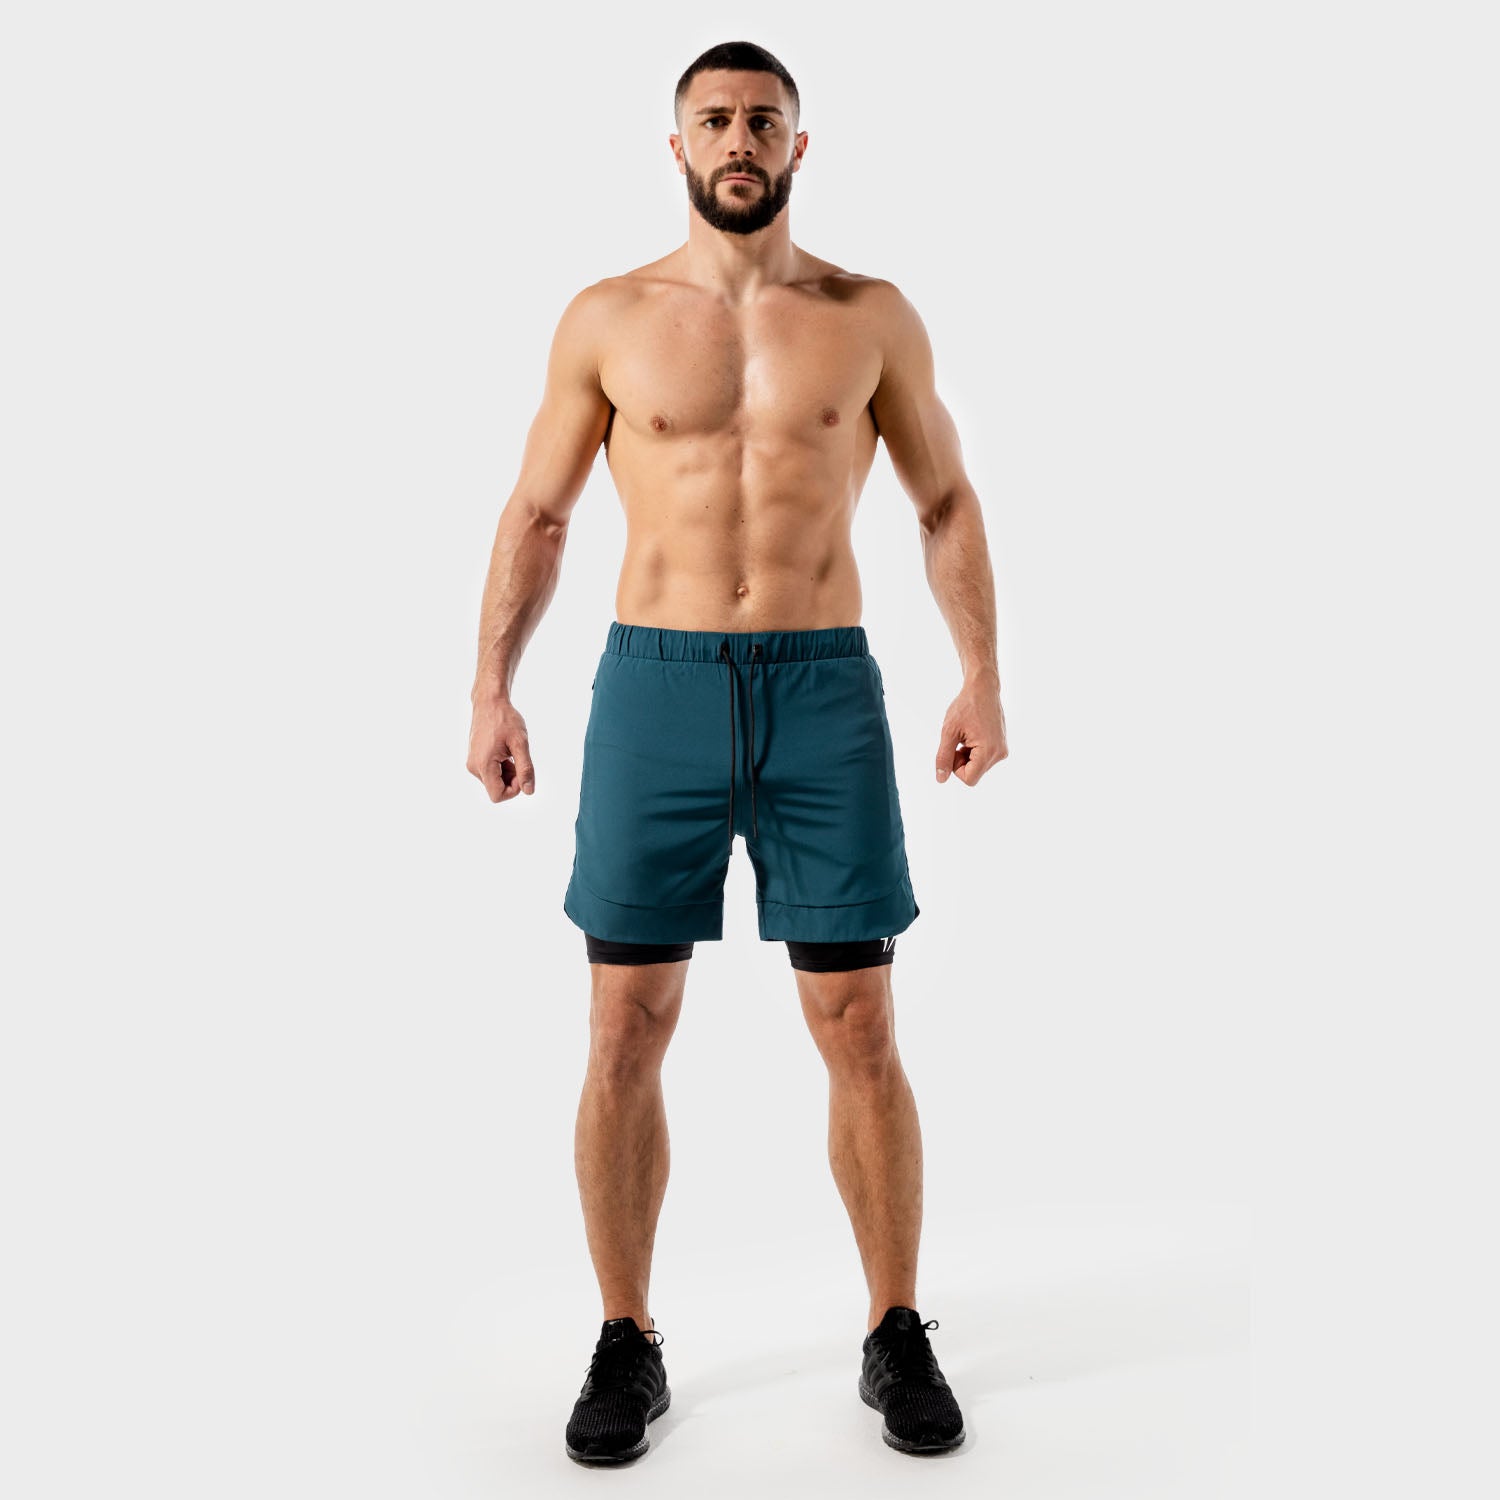 AE, Limitless 2-in-1 Shorts - Charcoal, Gym Shorts Men